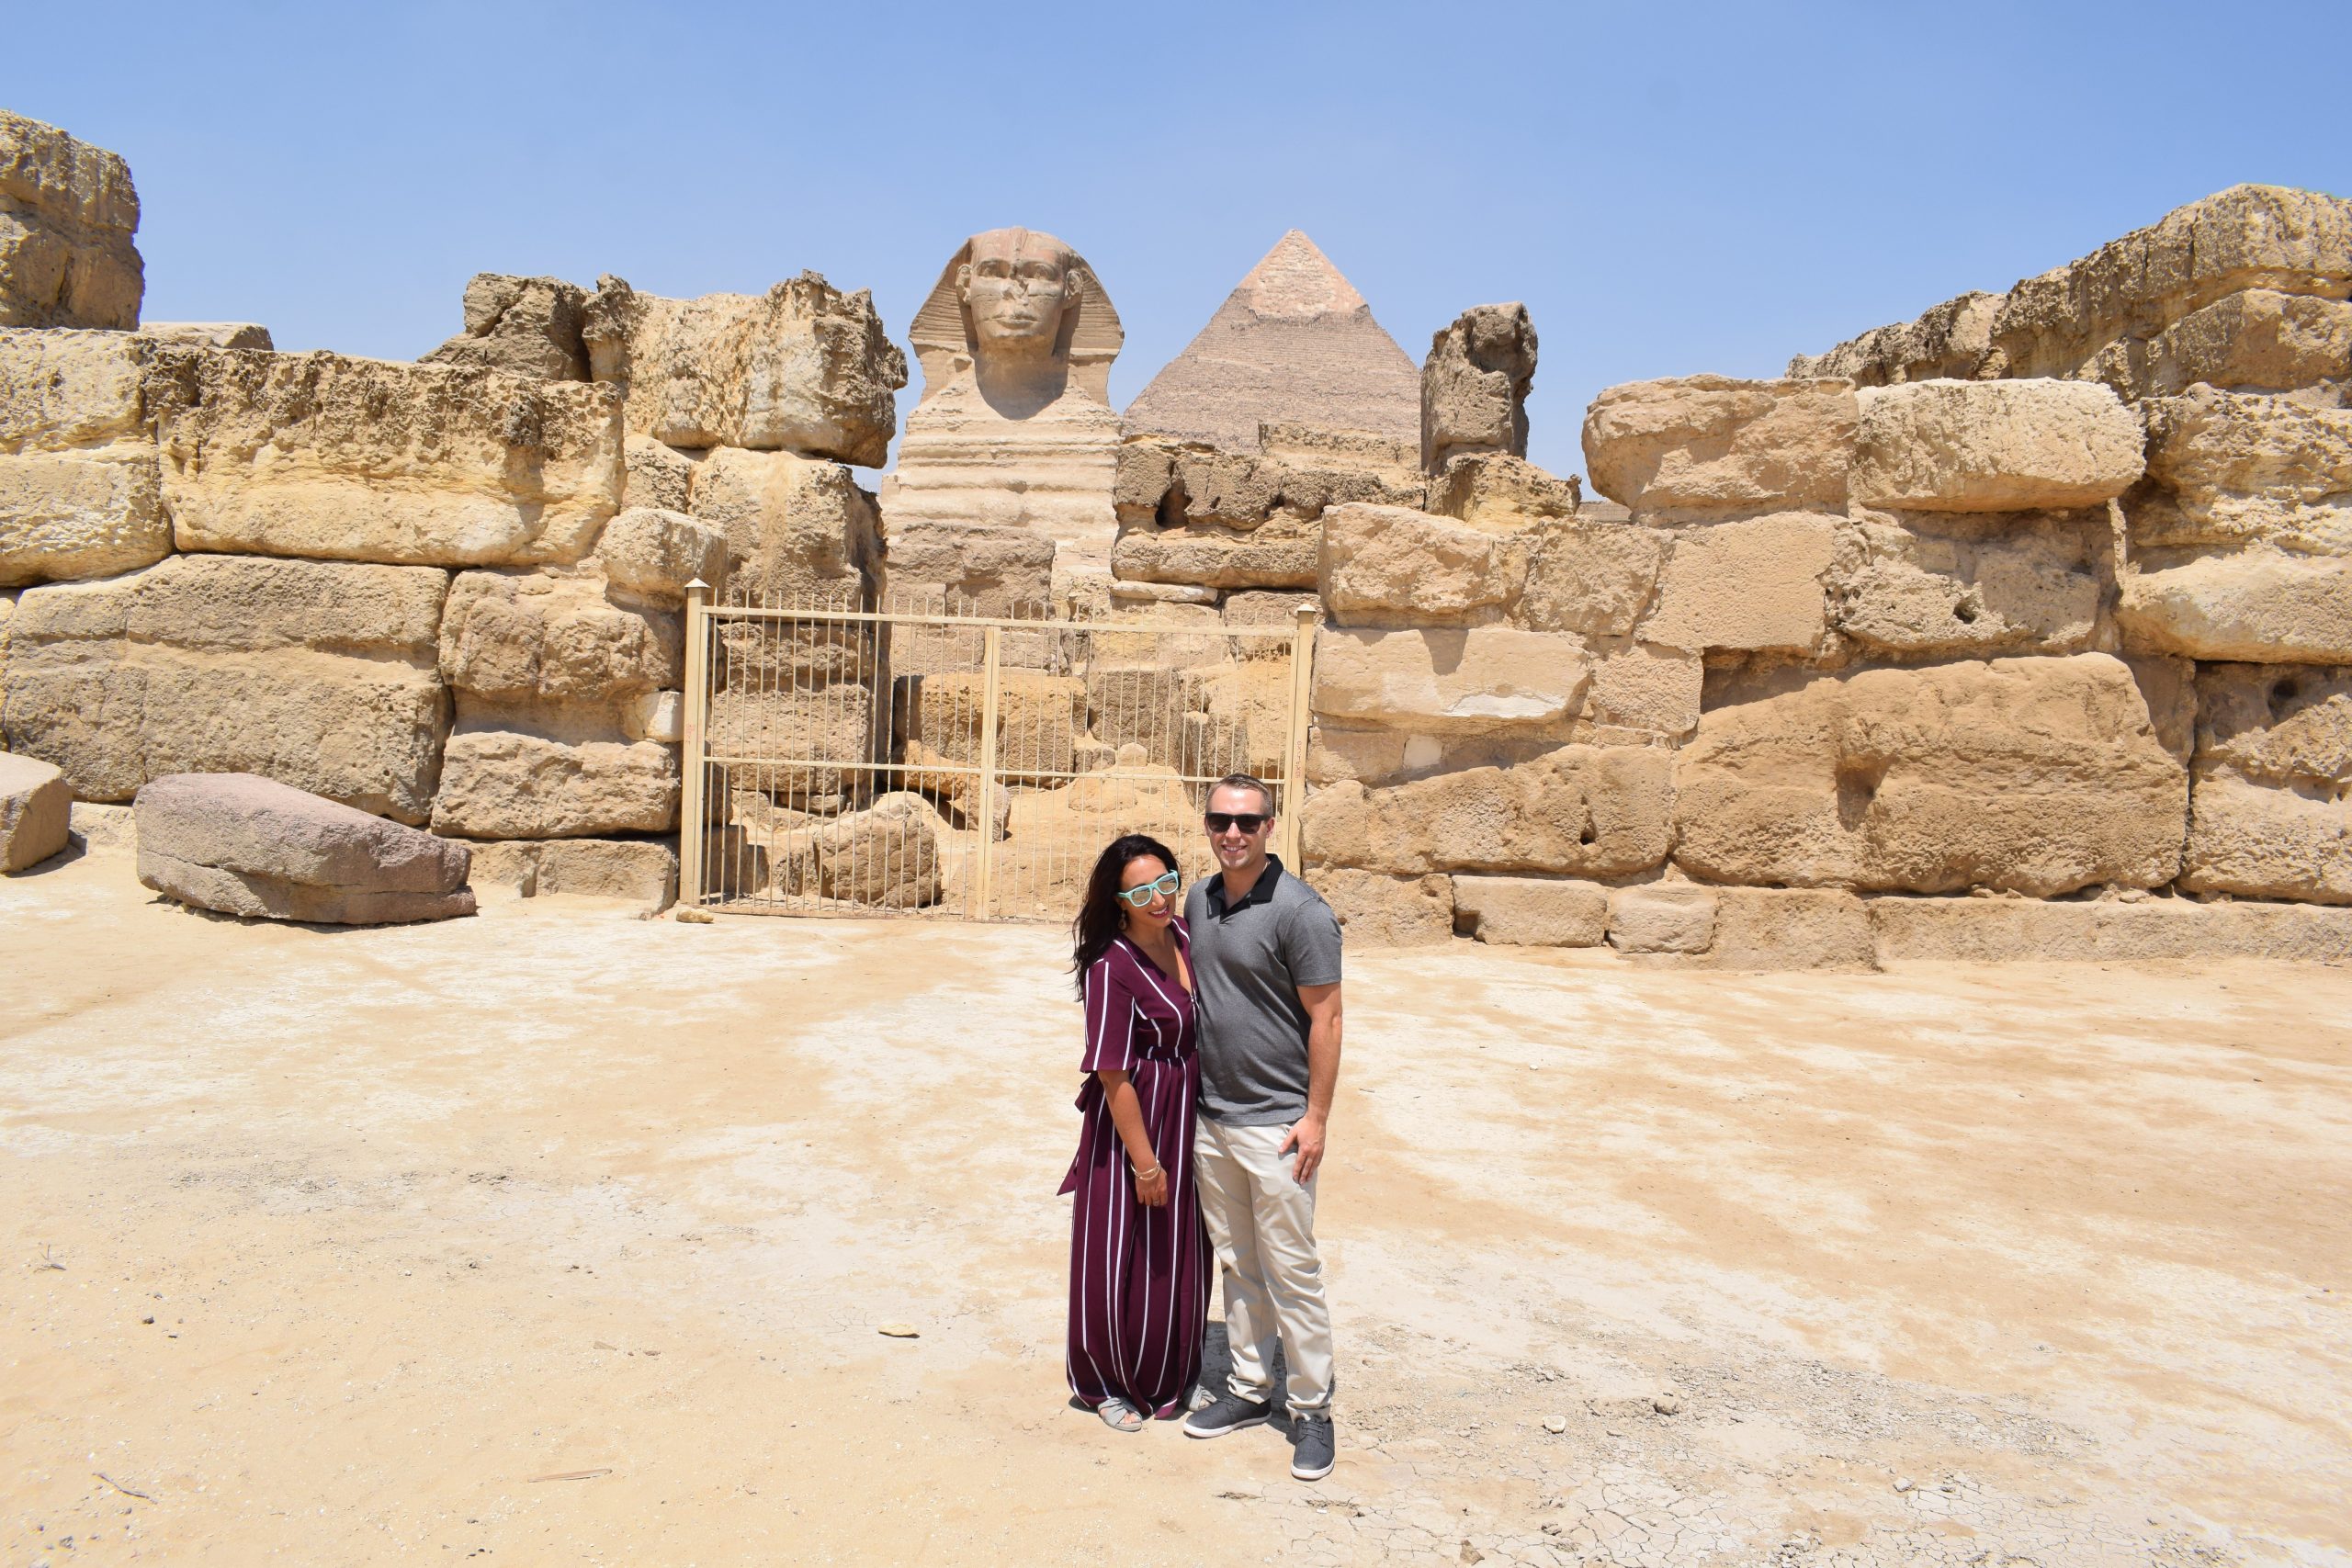 Boy and Girl standing in front of Sphinx and Pyramids of Giza